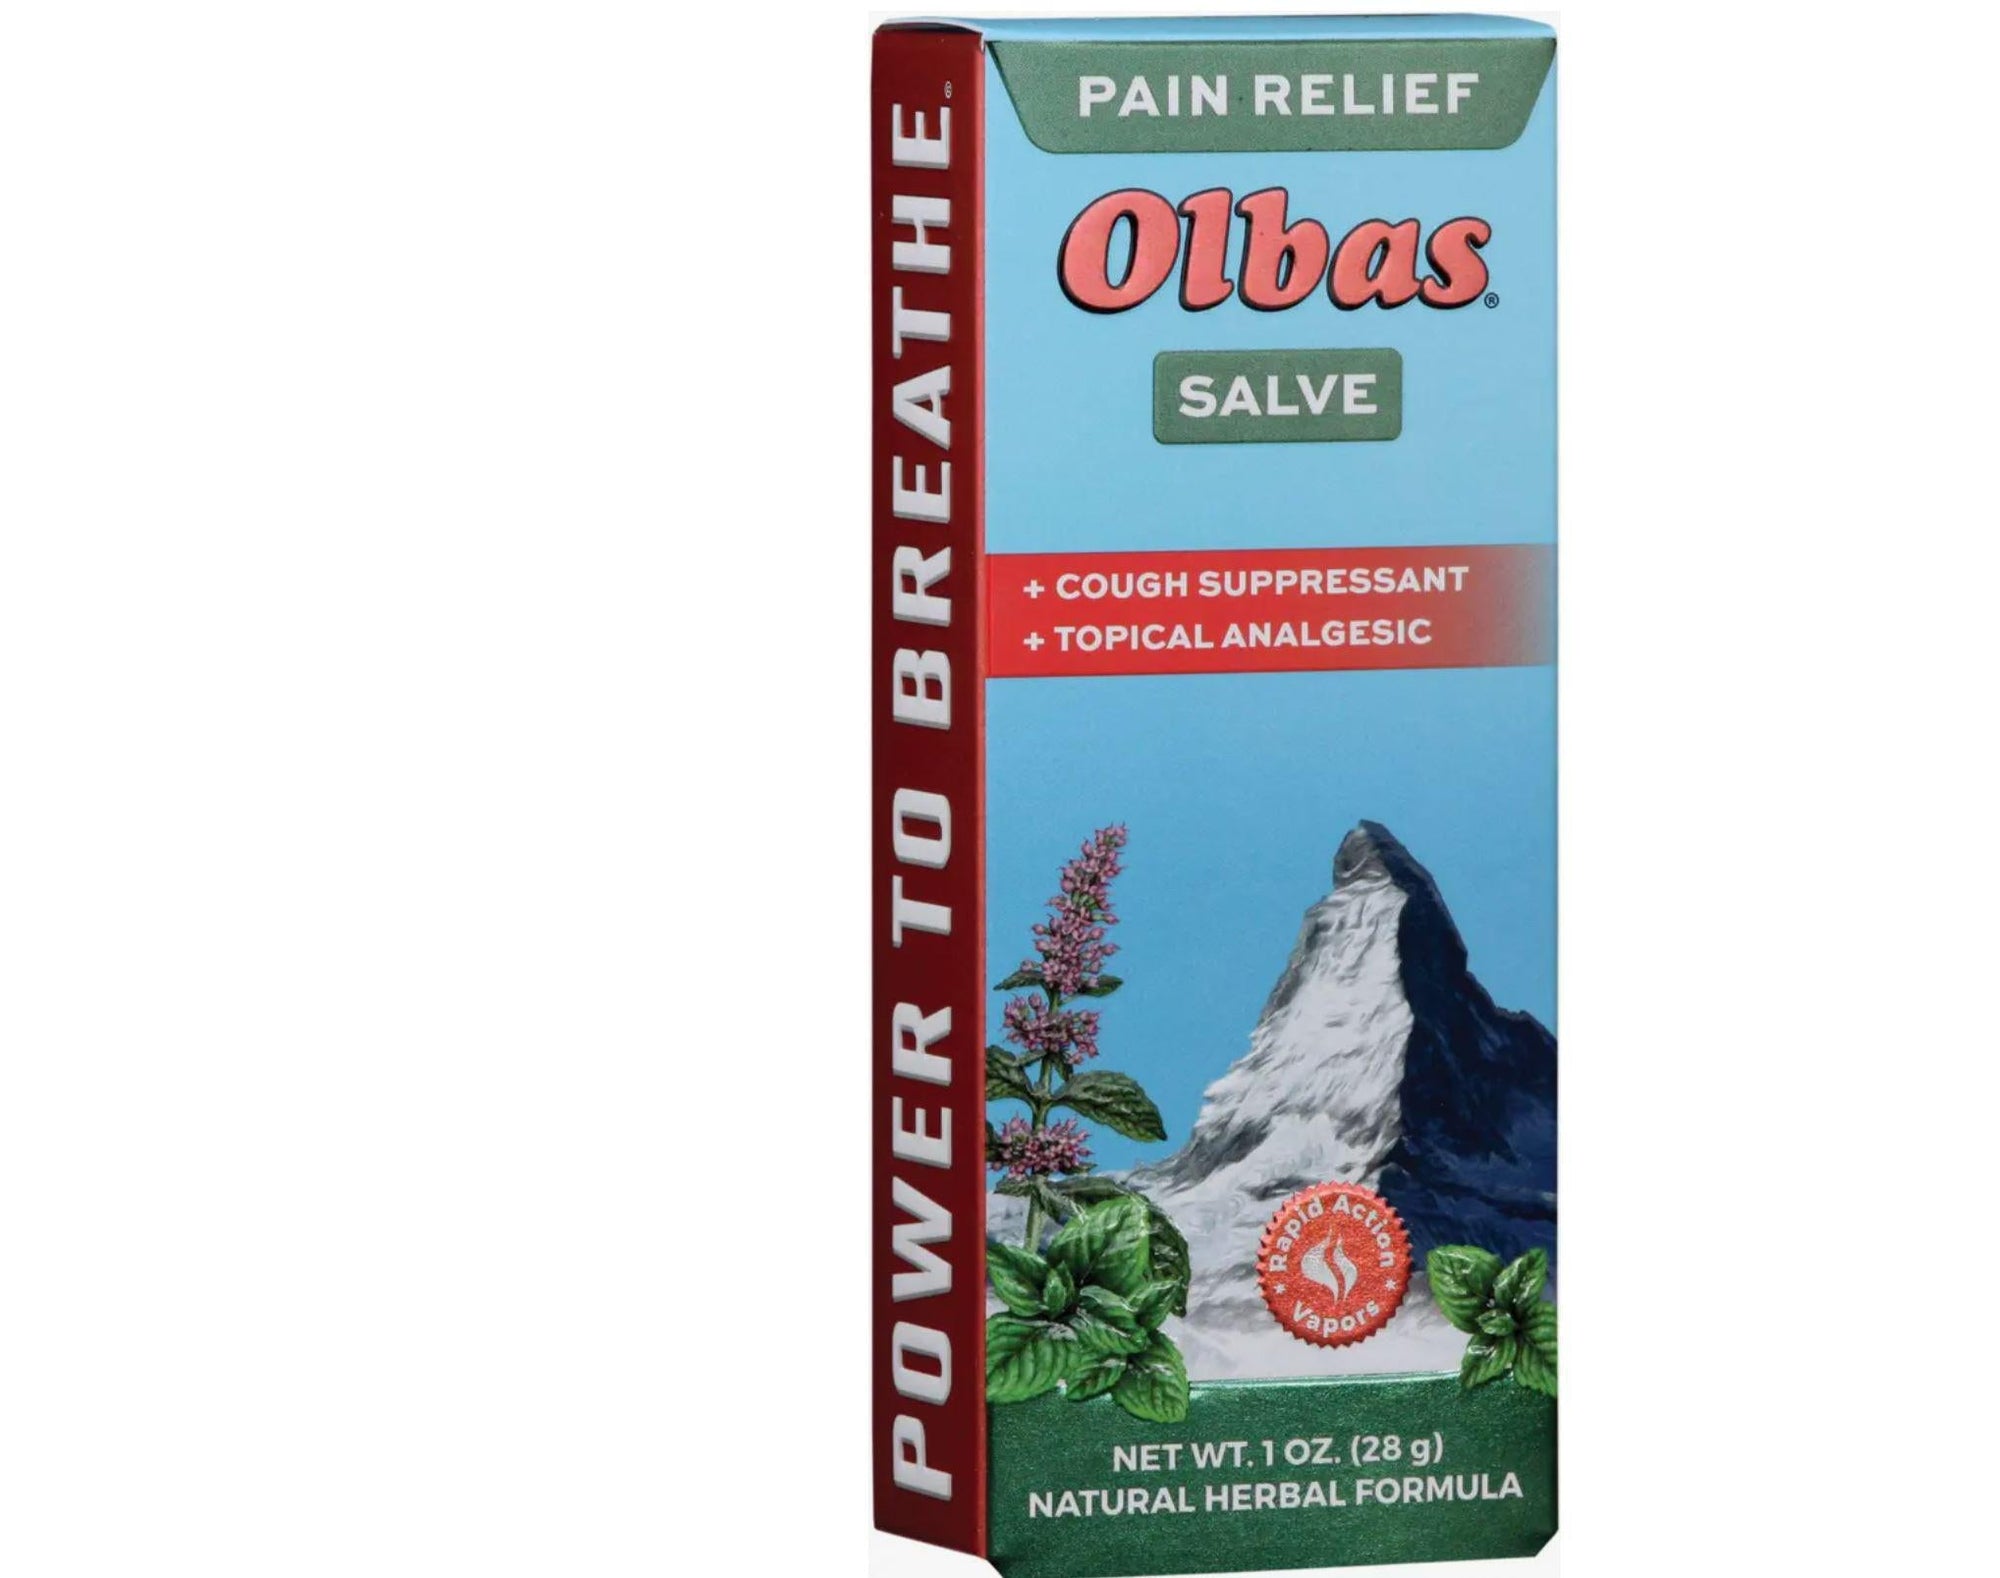 Olbas Analgesic Salve - Natural Pain Relief, Cough Suppressant